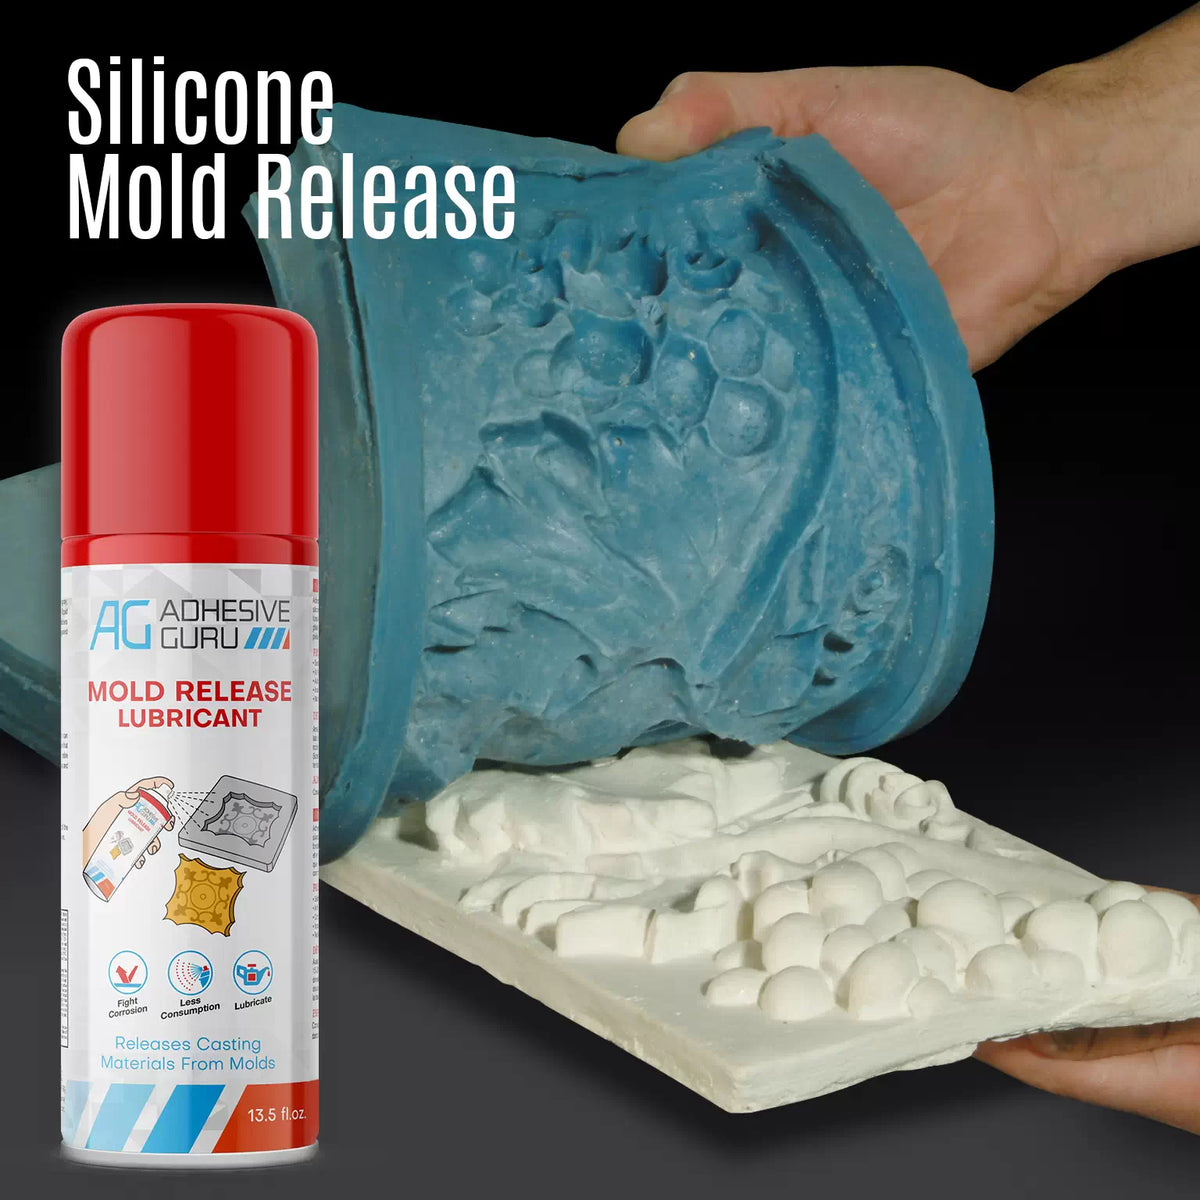 Top Rated Efficient silicon mold release spray At Luring Offers 